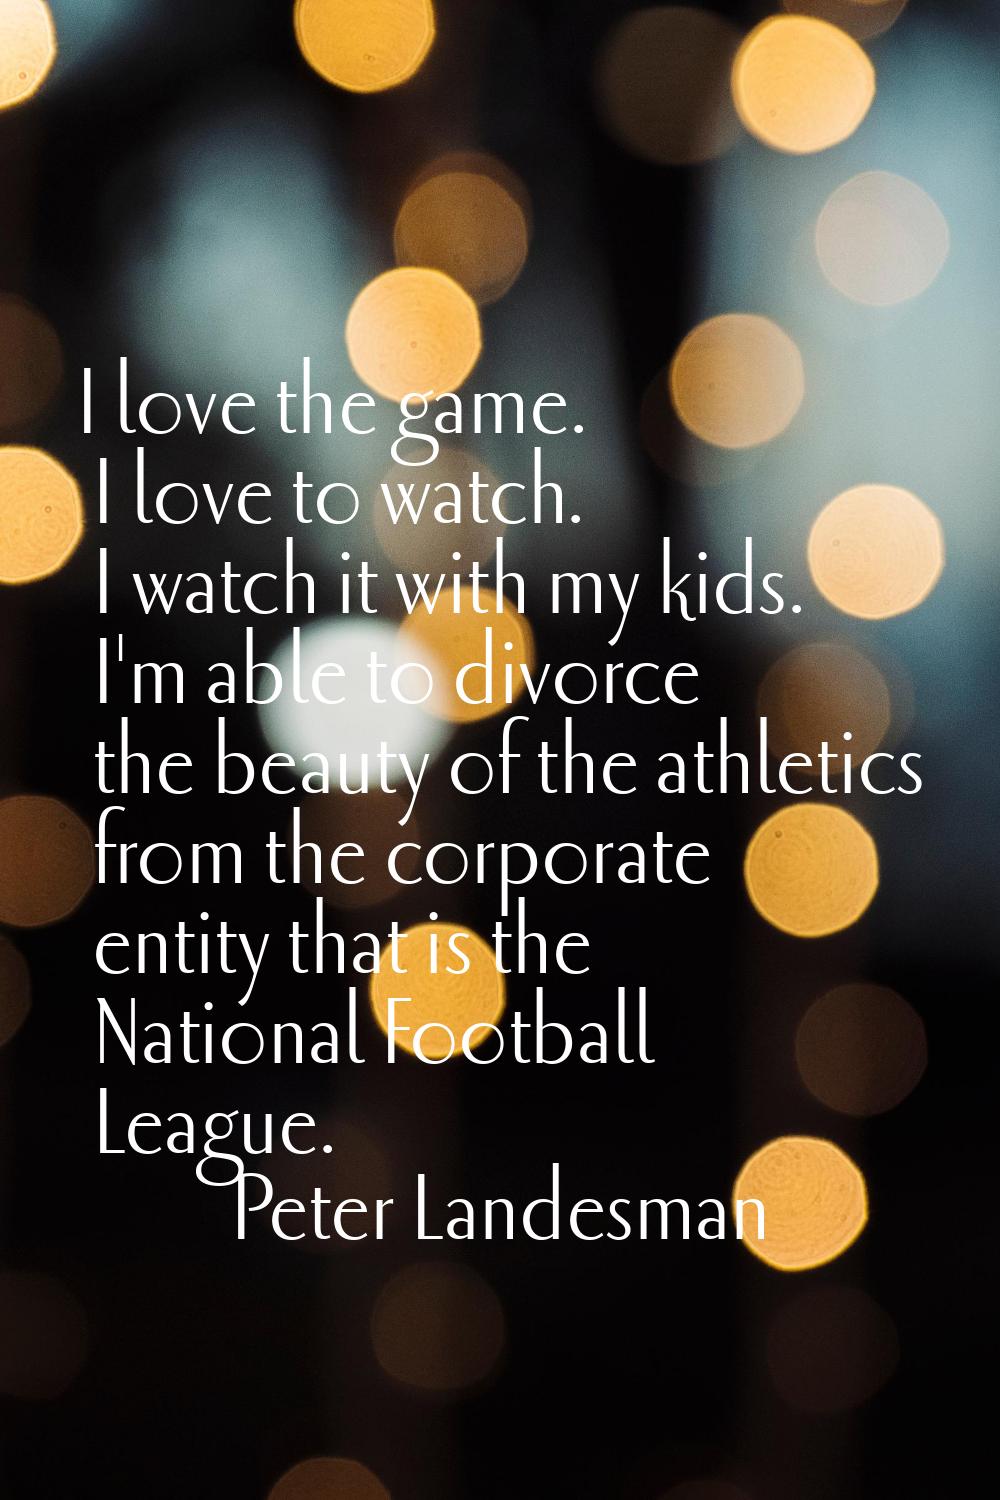 I love the game. I love to watch. I watch it with my kids. I'm able to divorce the beauty of the at